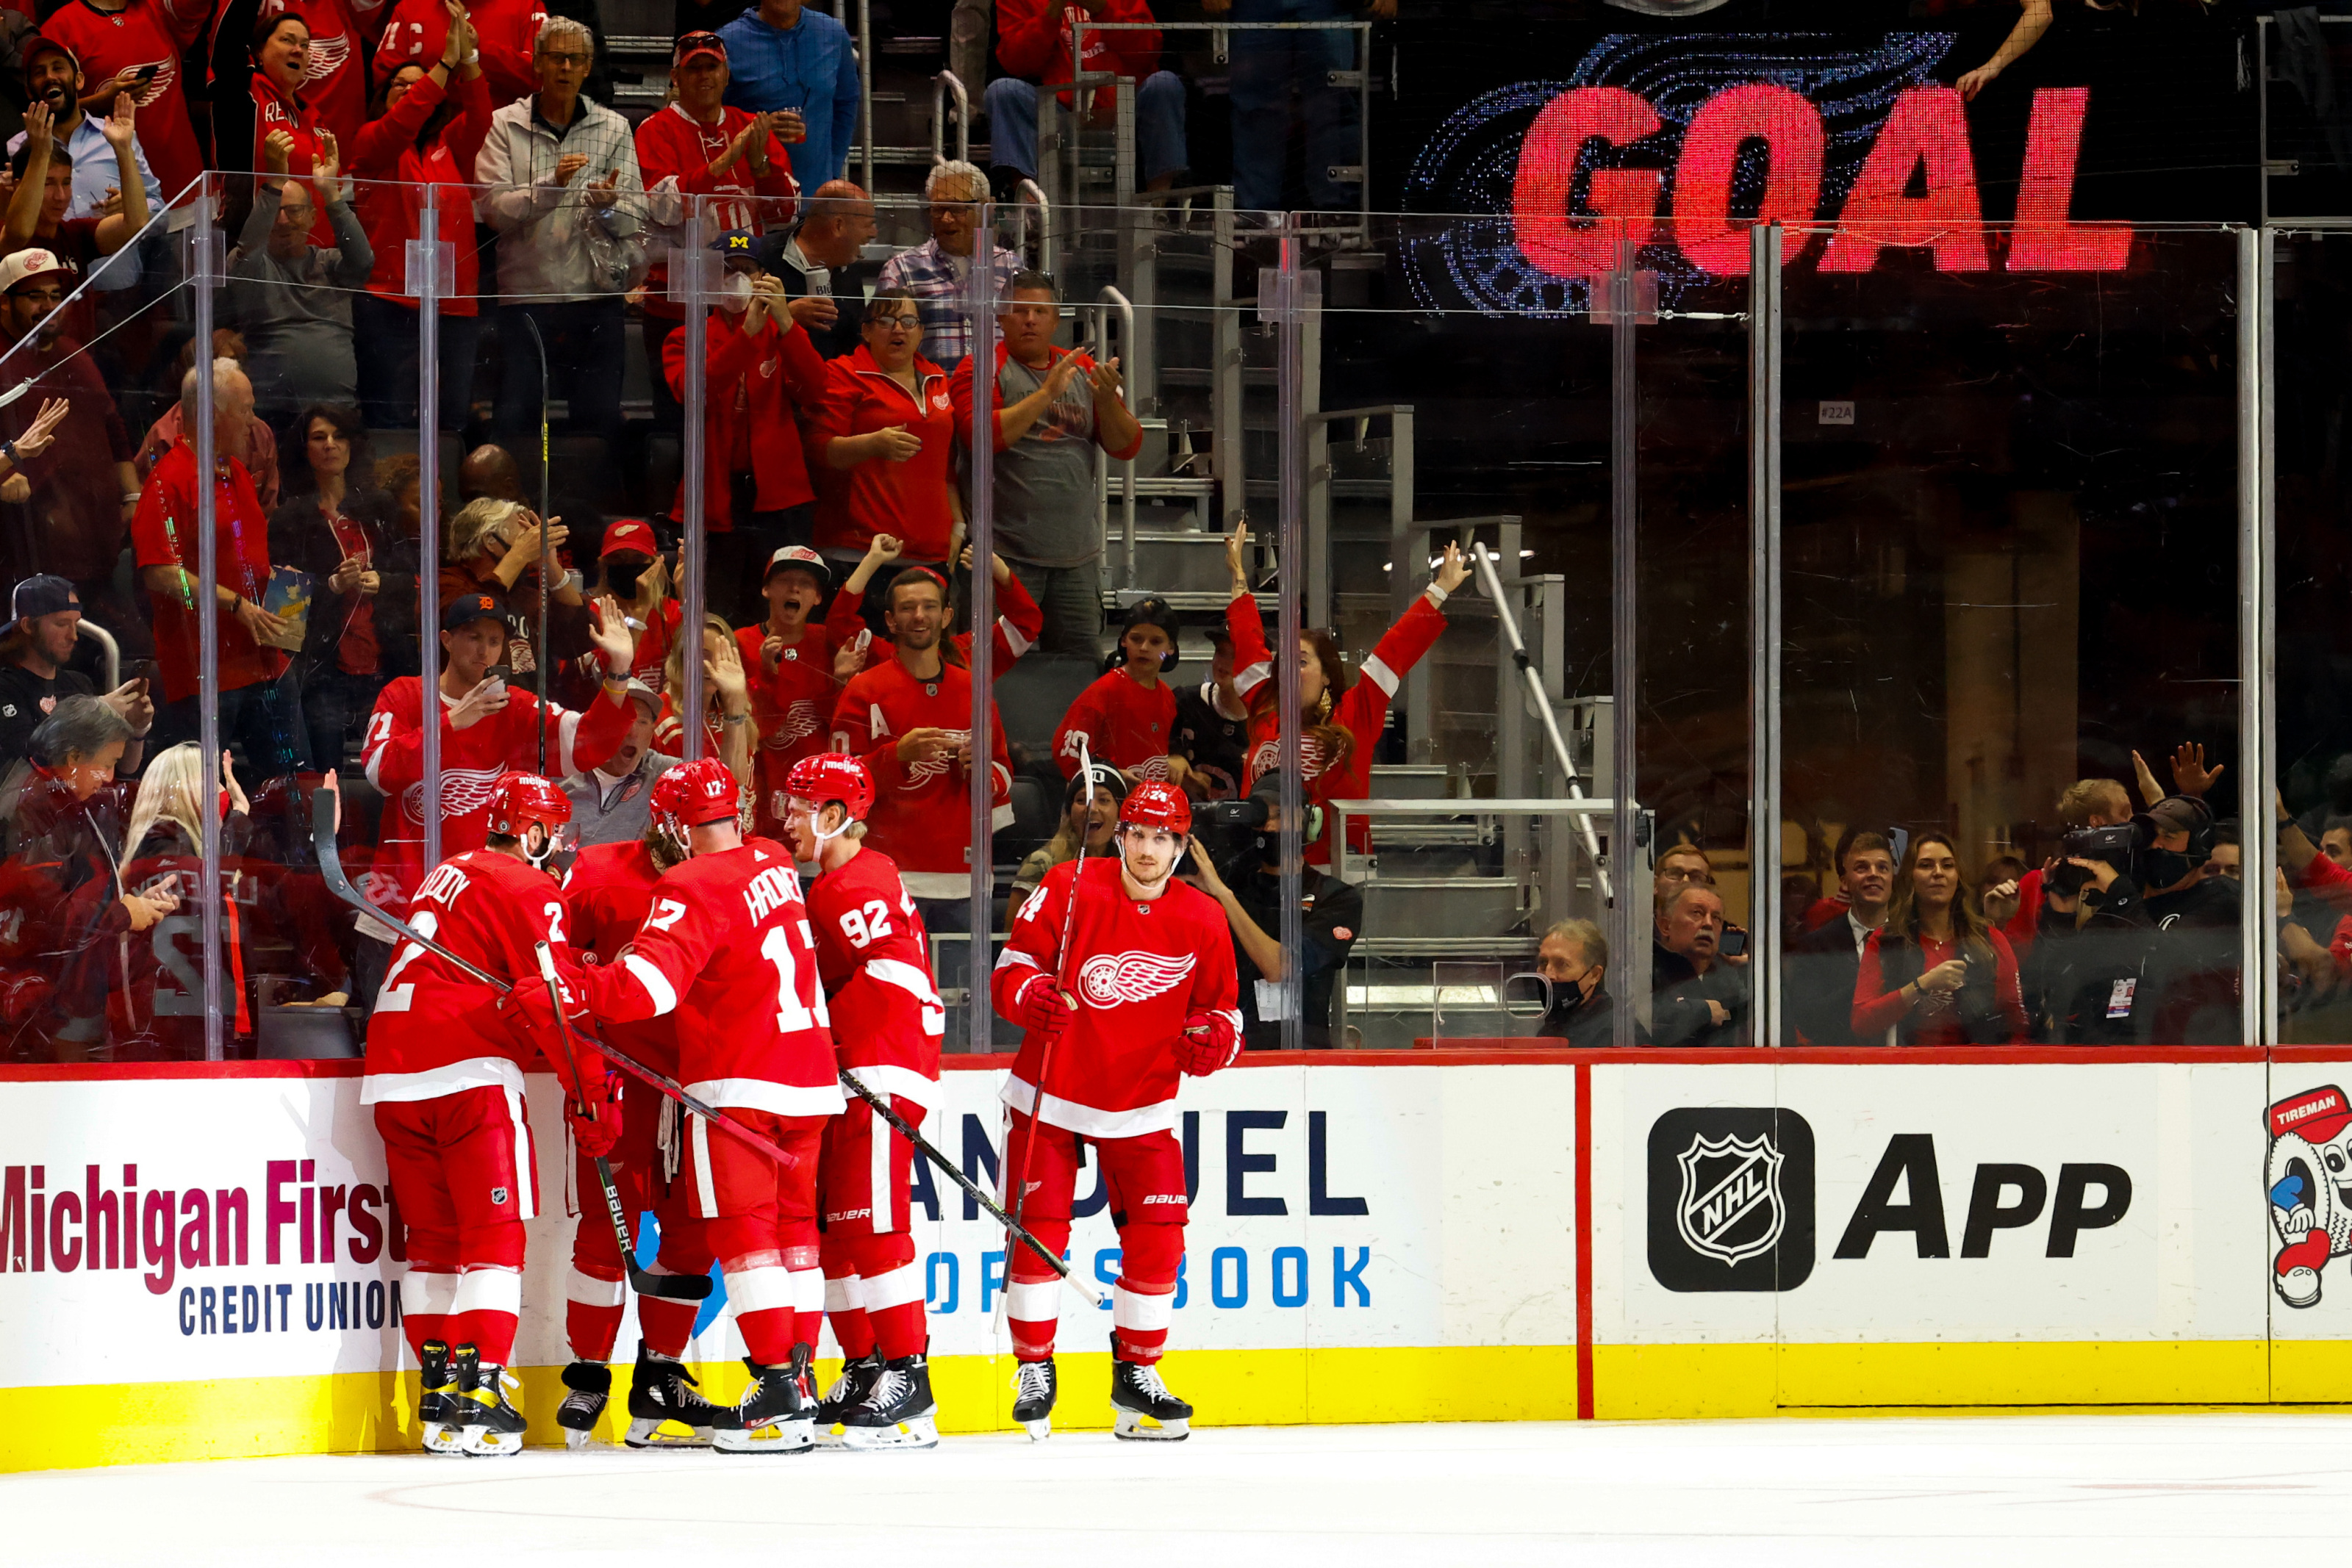 Red Wings Fall To Lightning 7-6 In OT As Bertuzzi Scores 4 Goals